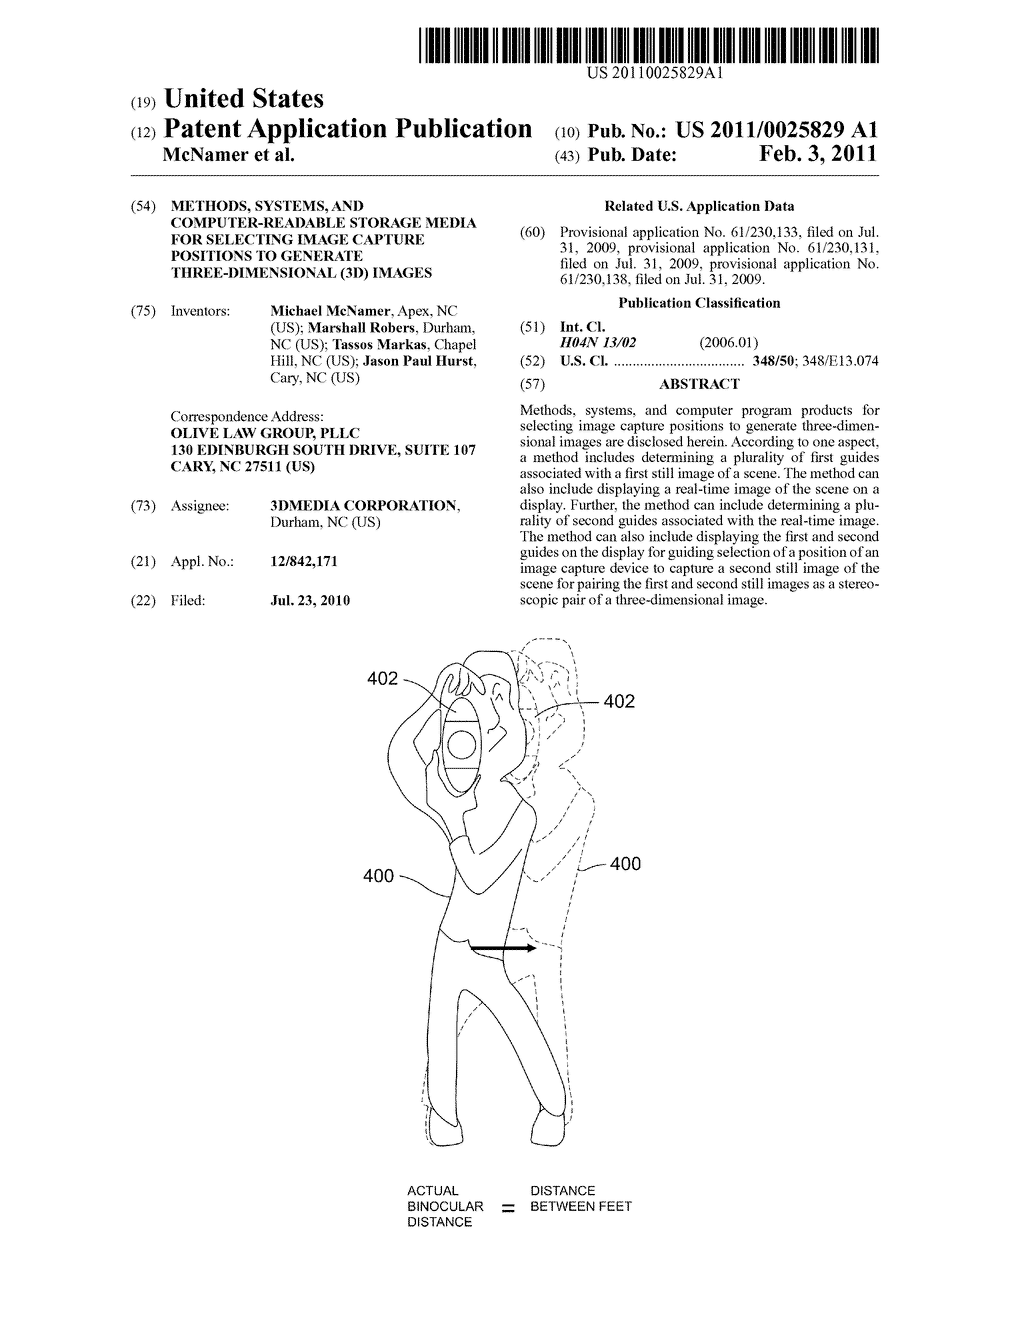 METHODS, SYSTEMS, AND COMPUTER-READABLE STORAGE MEDIA FOR SELECTING IMAGE CAPTURE POSITIONS TO GENERATE THREE-DIMENSIONAL (3D) IMAGES - diagram, schematic, and image 01